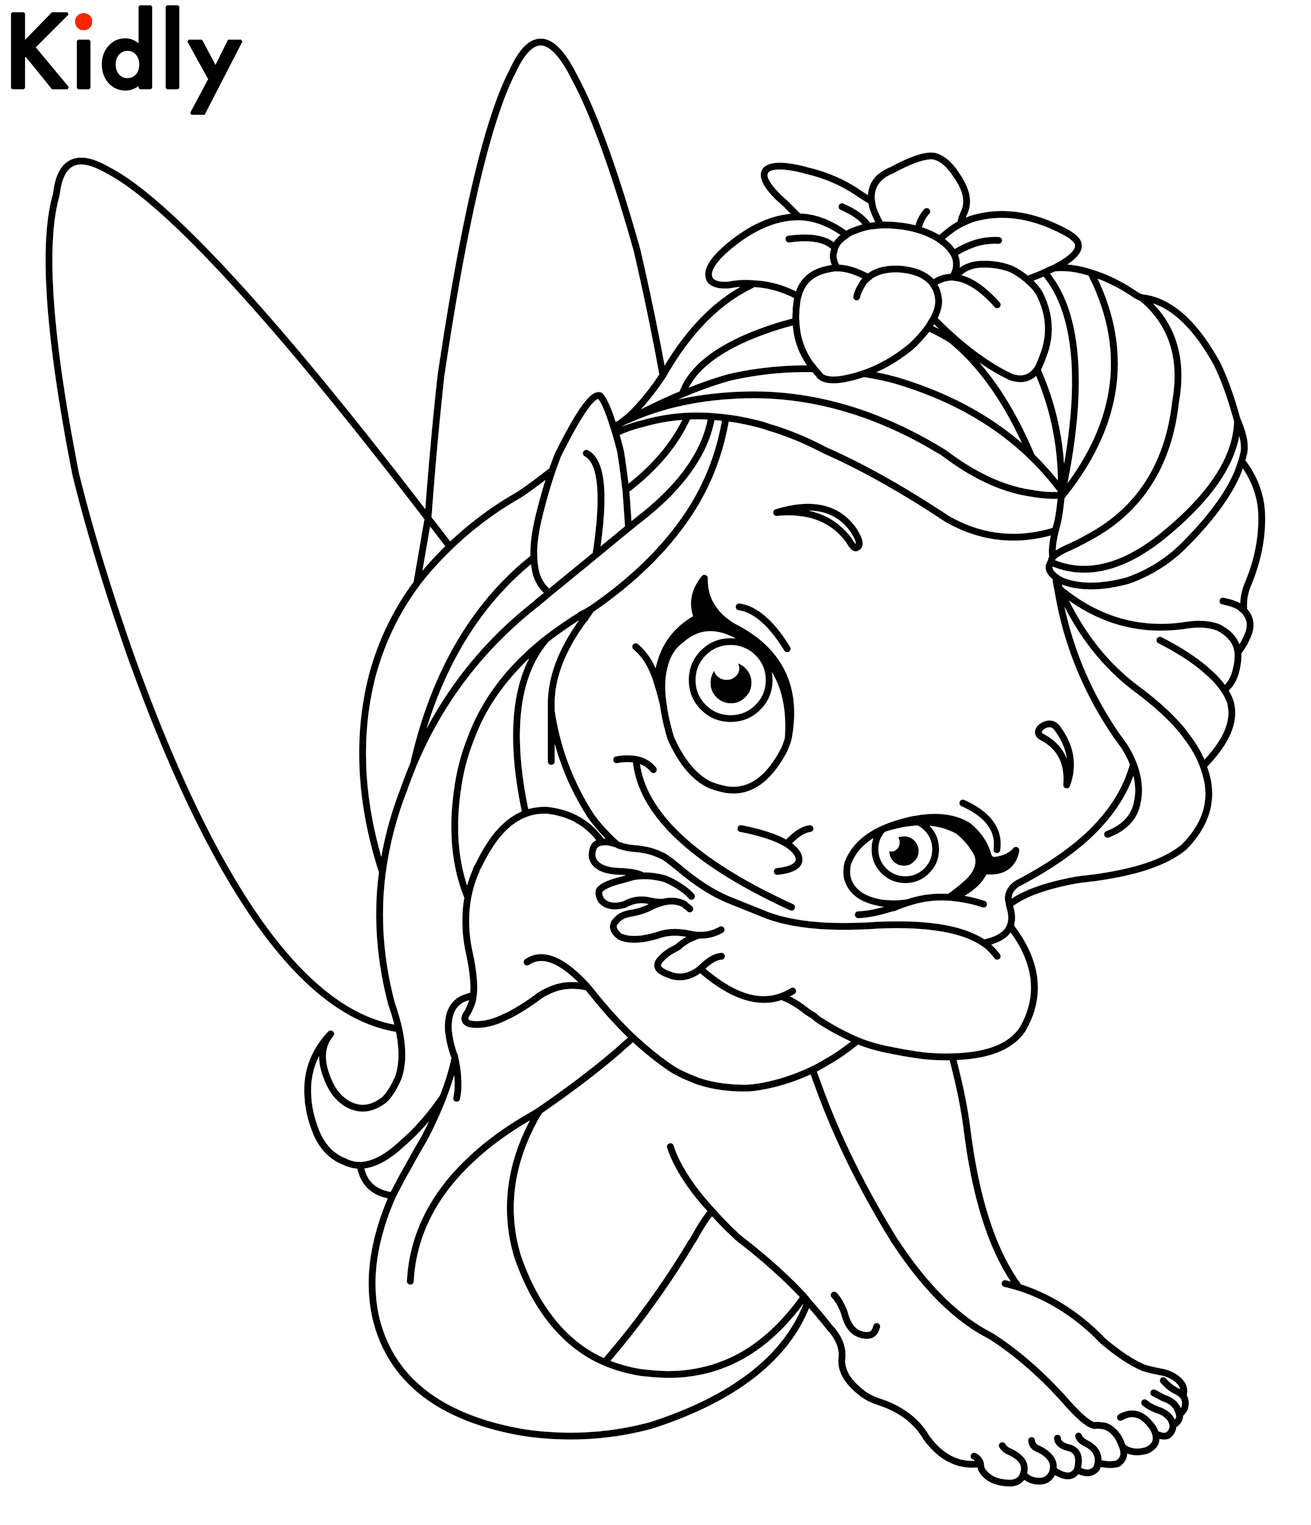 Disney Fairies Coloring Pages Silvermist at GetDrawings | Free download